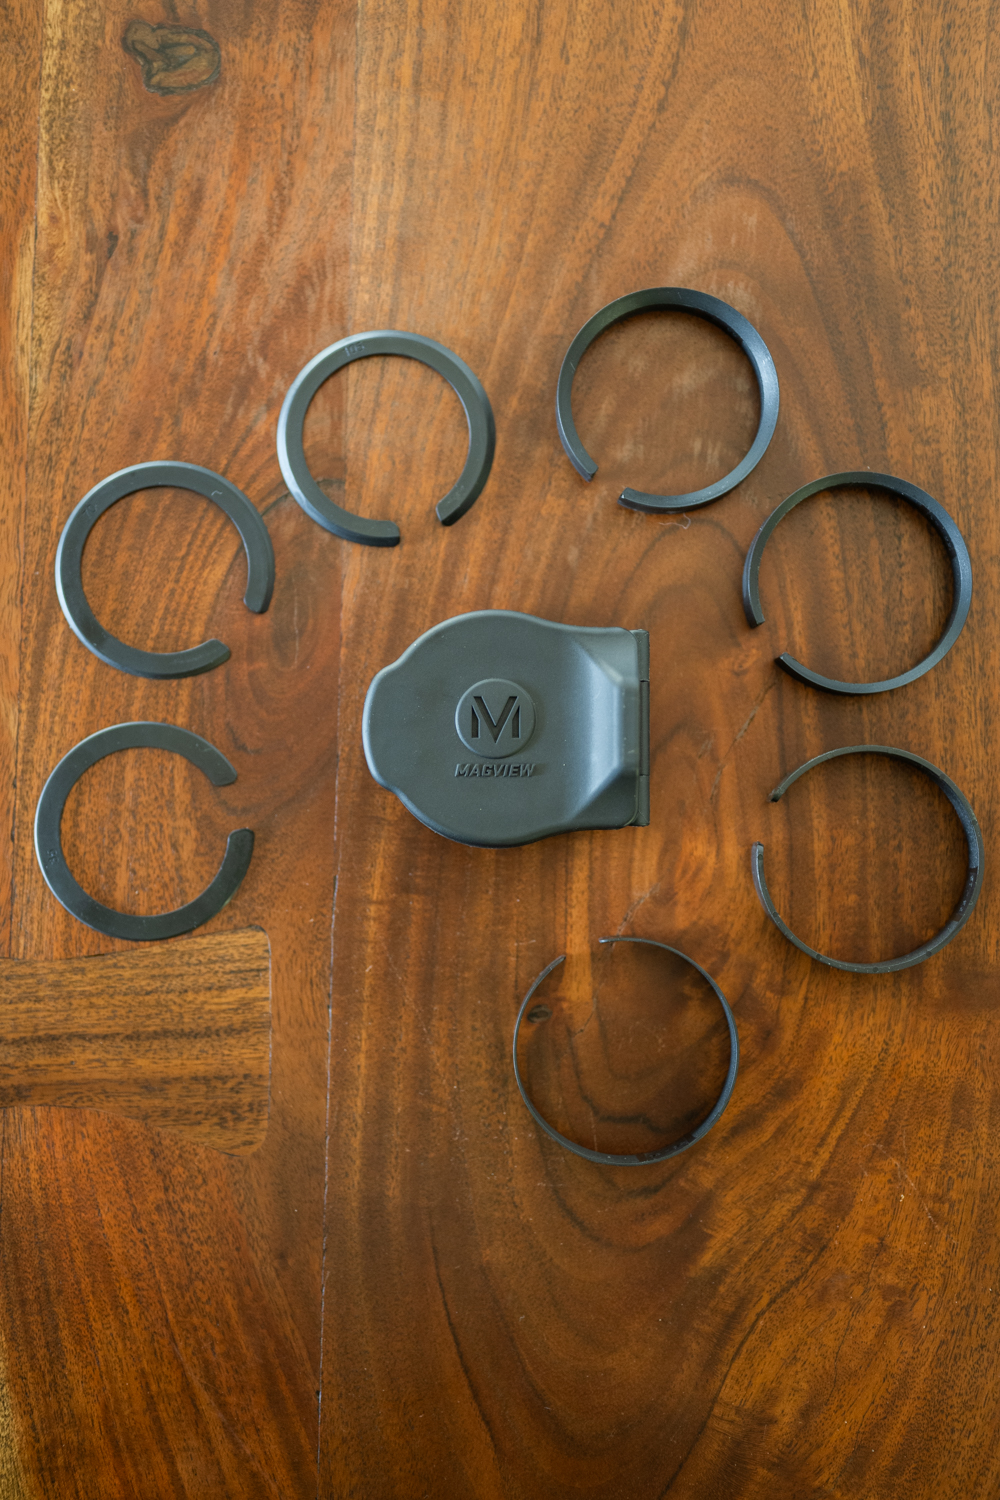 The Magview S1 ships with eye relief spacers and sizing rings to fit most popular hunting spotting scopes.